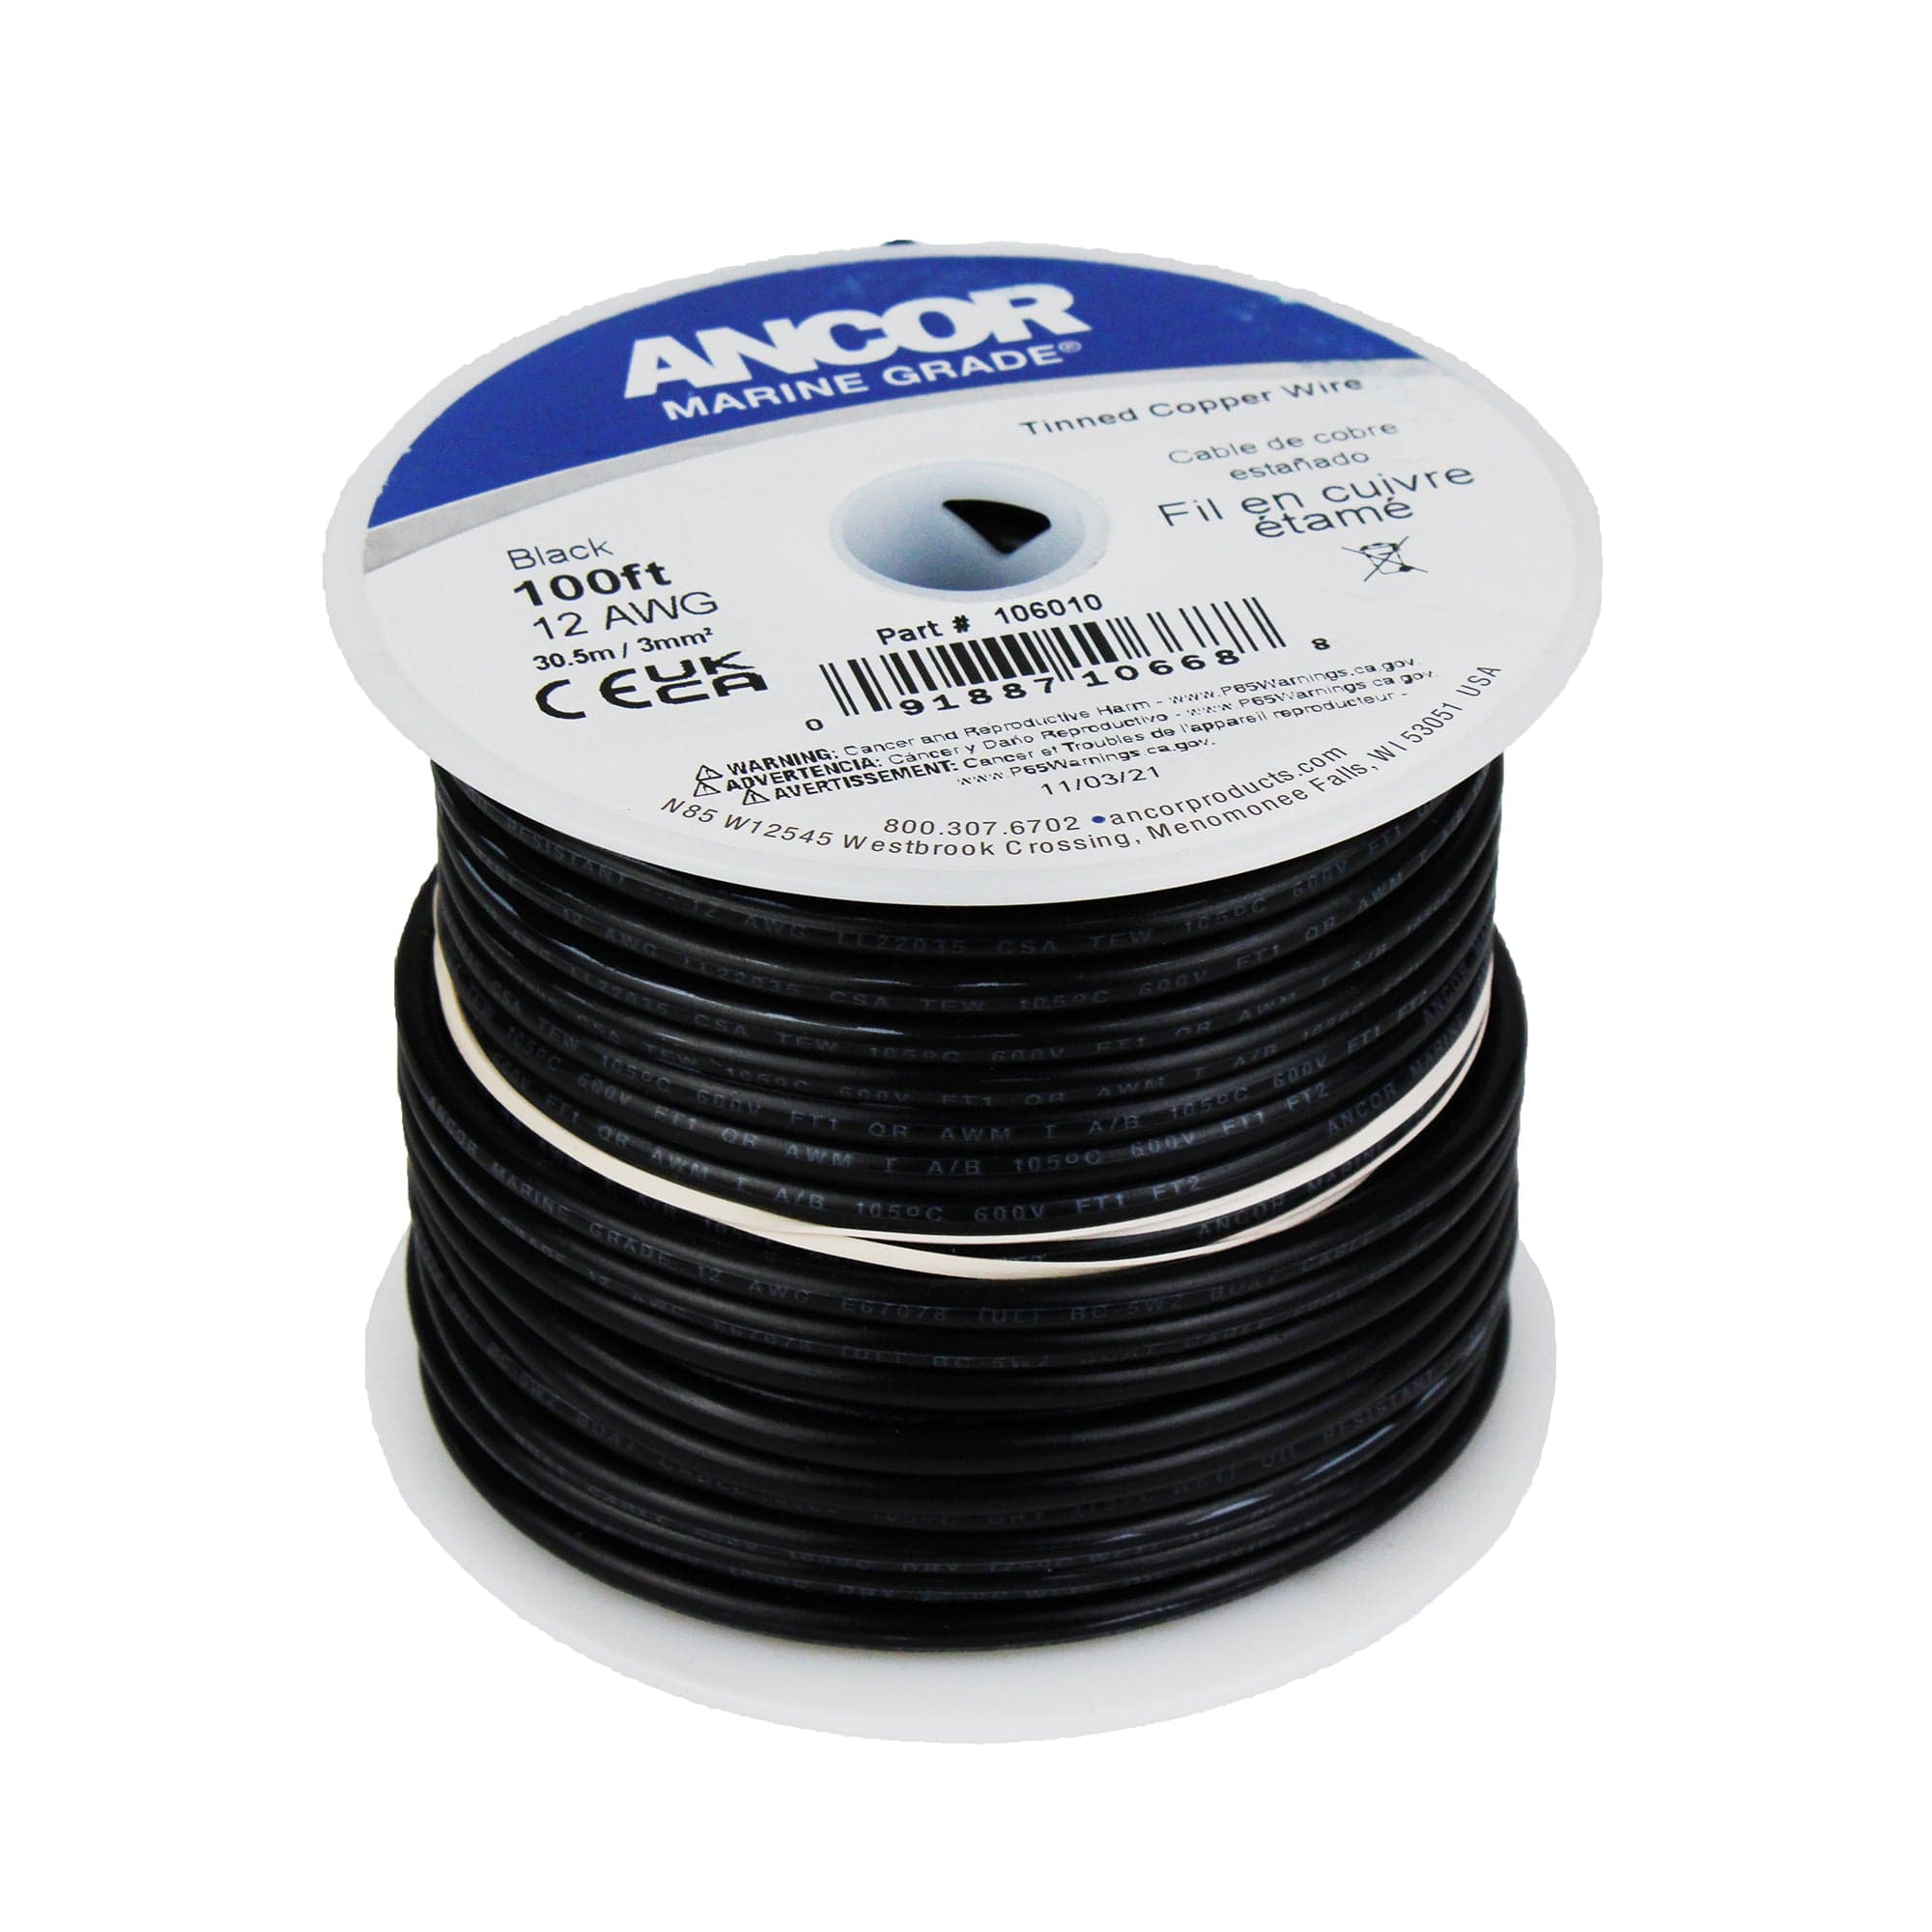 Ancor 106010 Tinned Copper Wire, 12 AWG (3mm2), 100 Ft. - Black